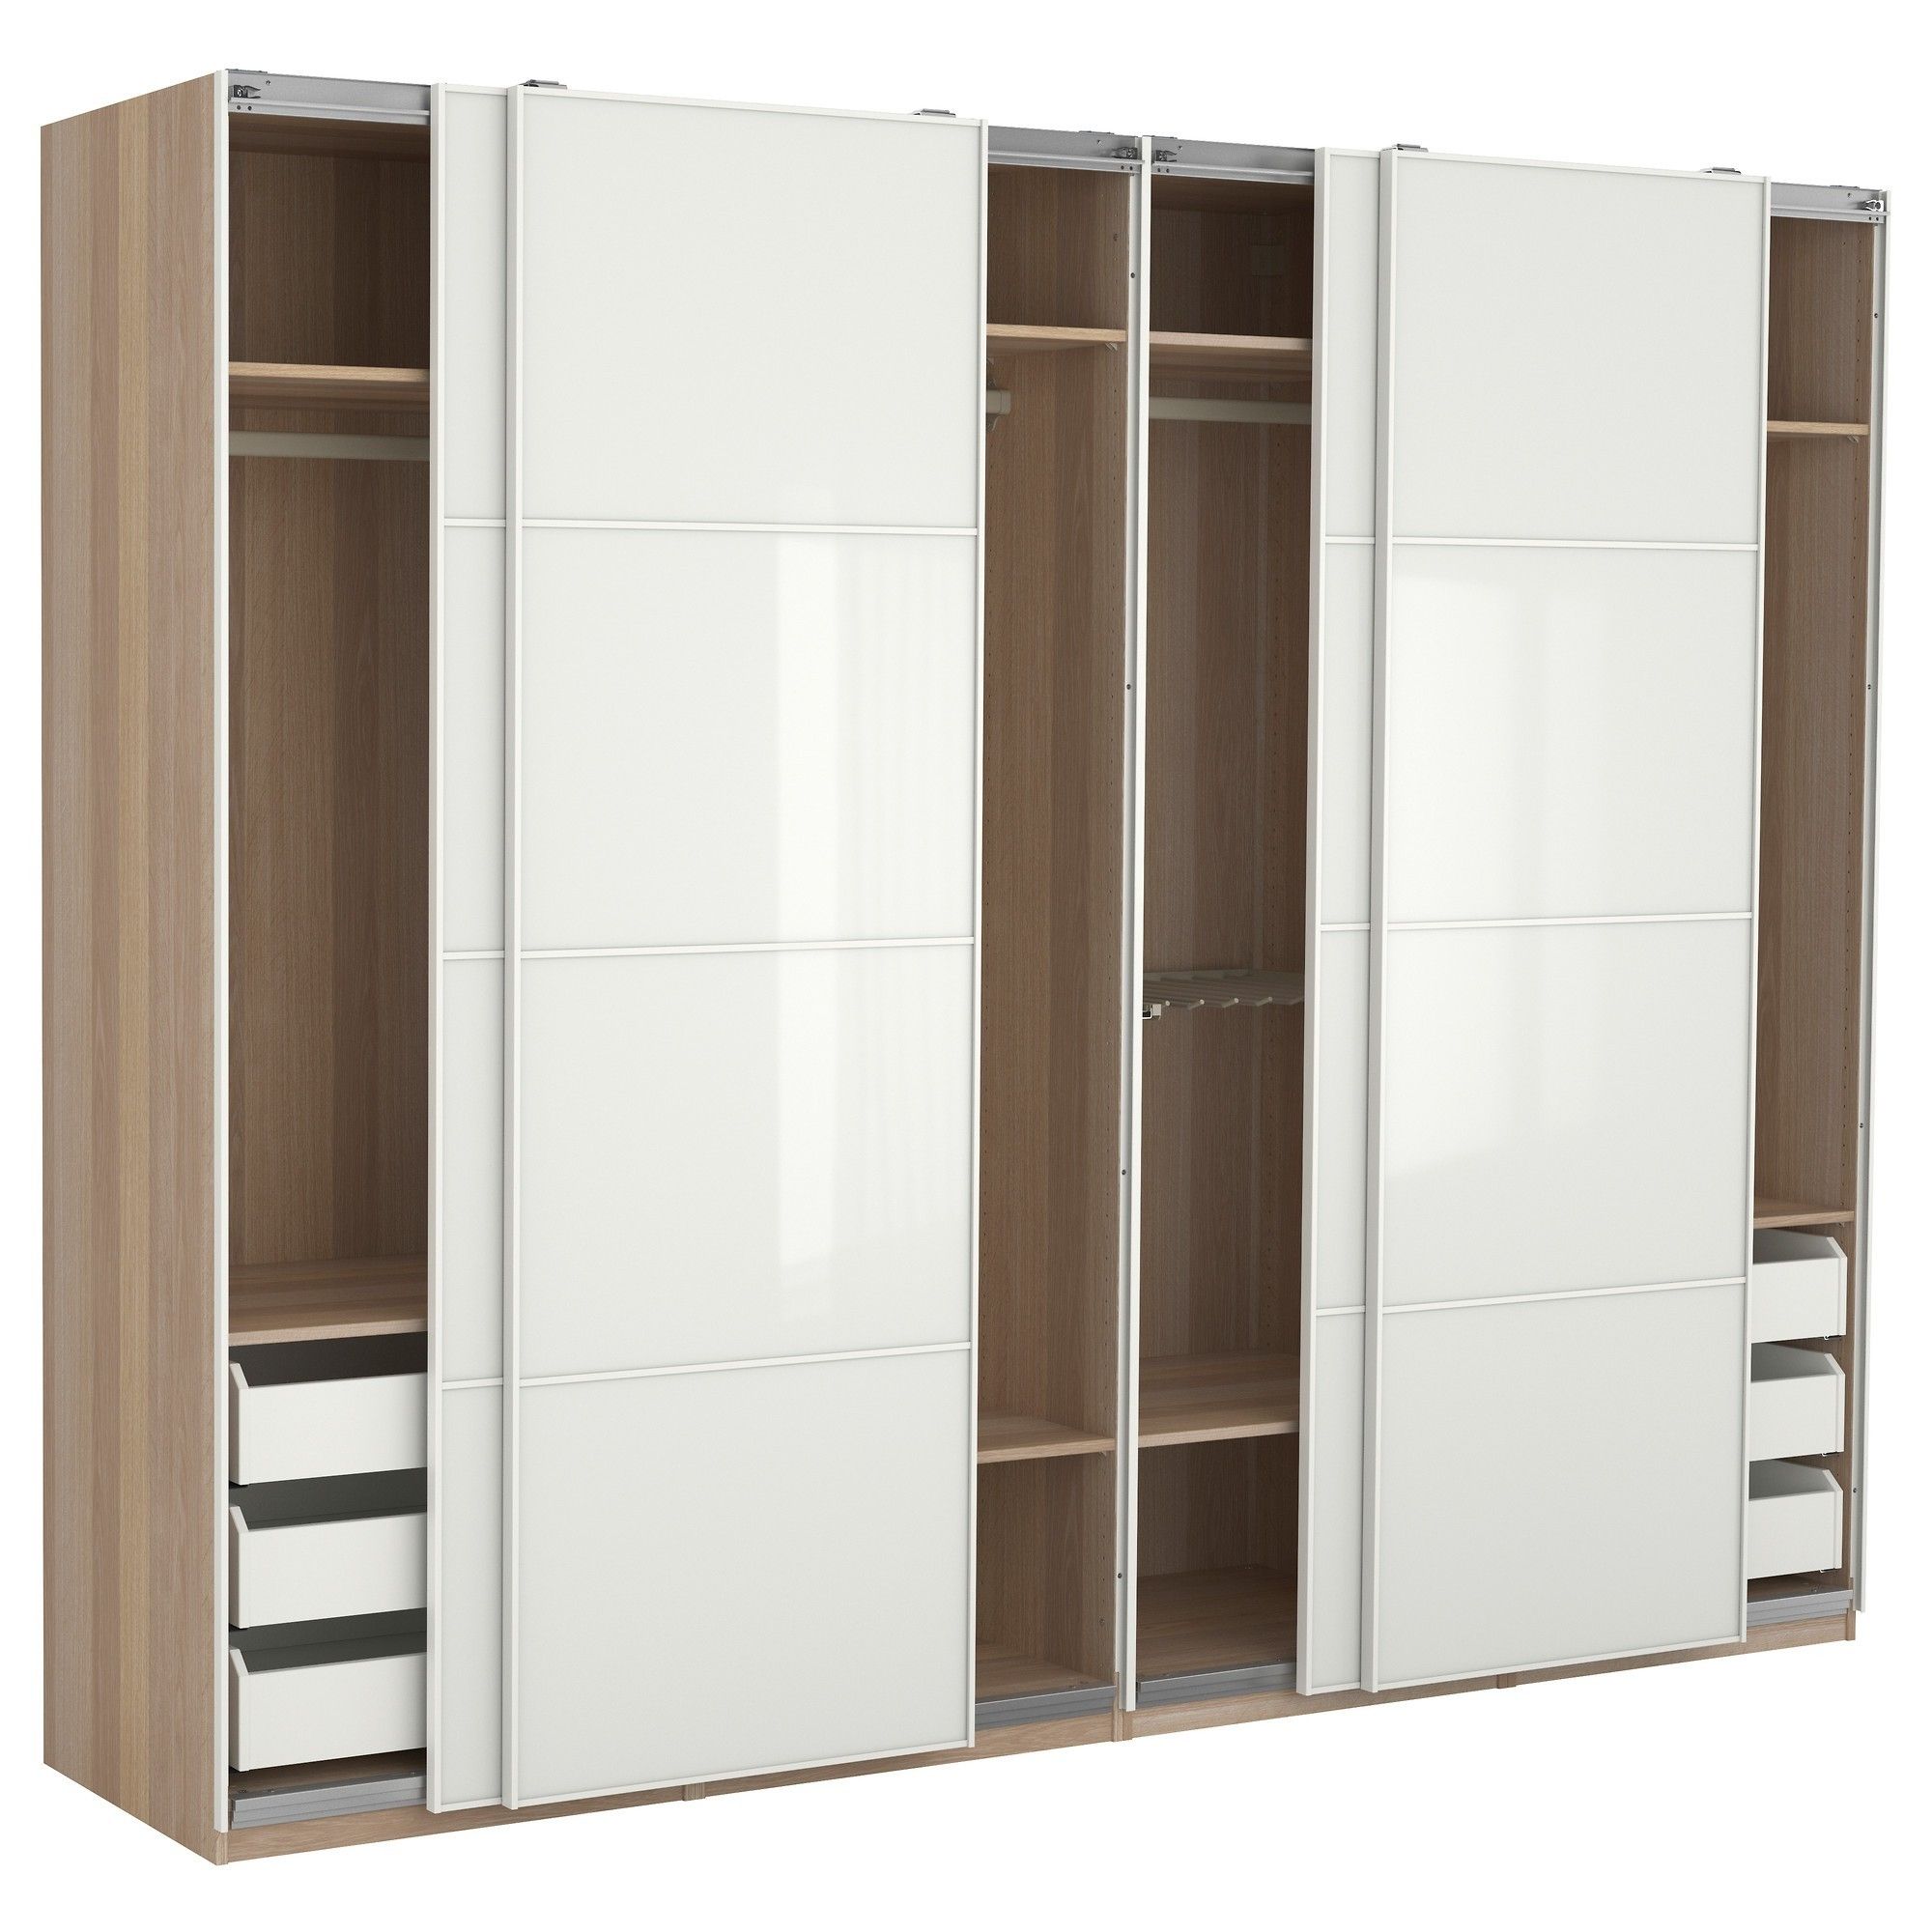 Large Metal Wardrobe Closet Cabinet Wardrobes Armoire Which Will Intended For Best And Newest Metal Wardrobes (View 7 of 15)